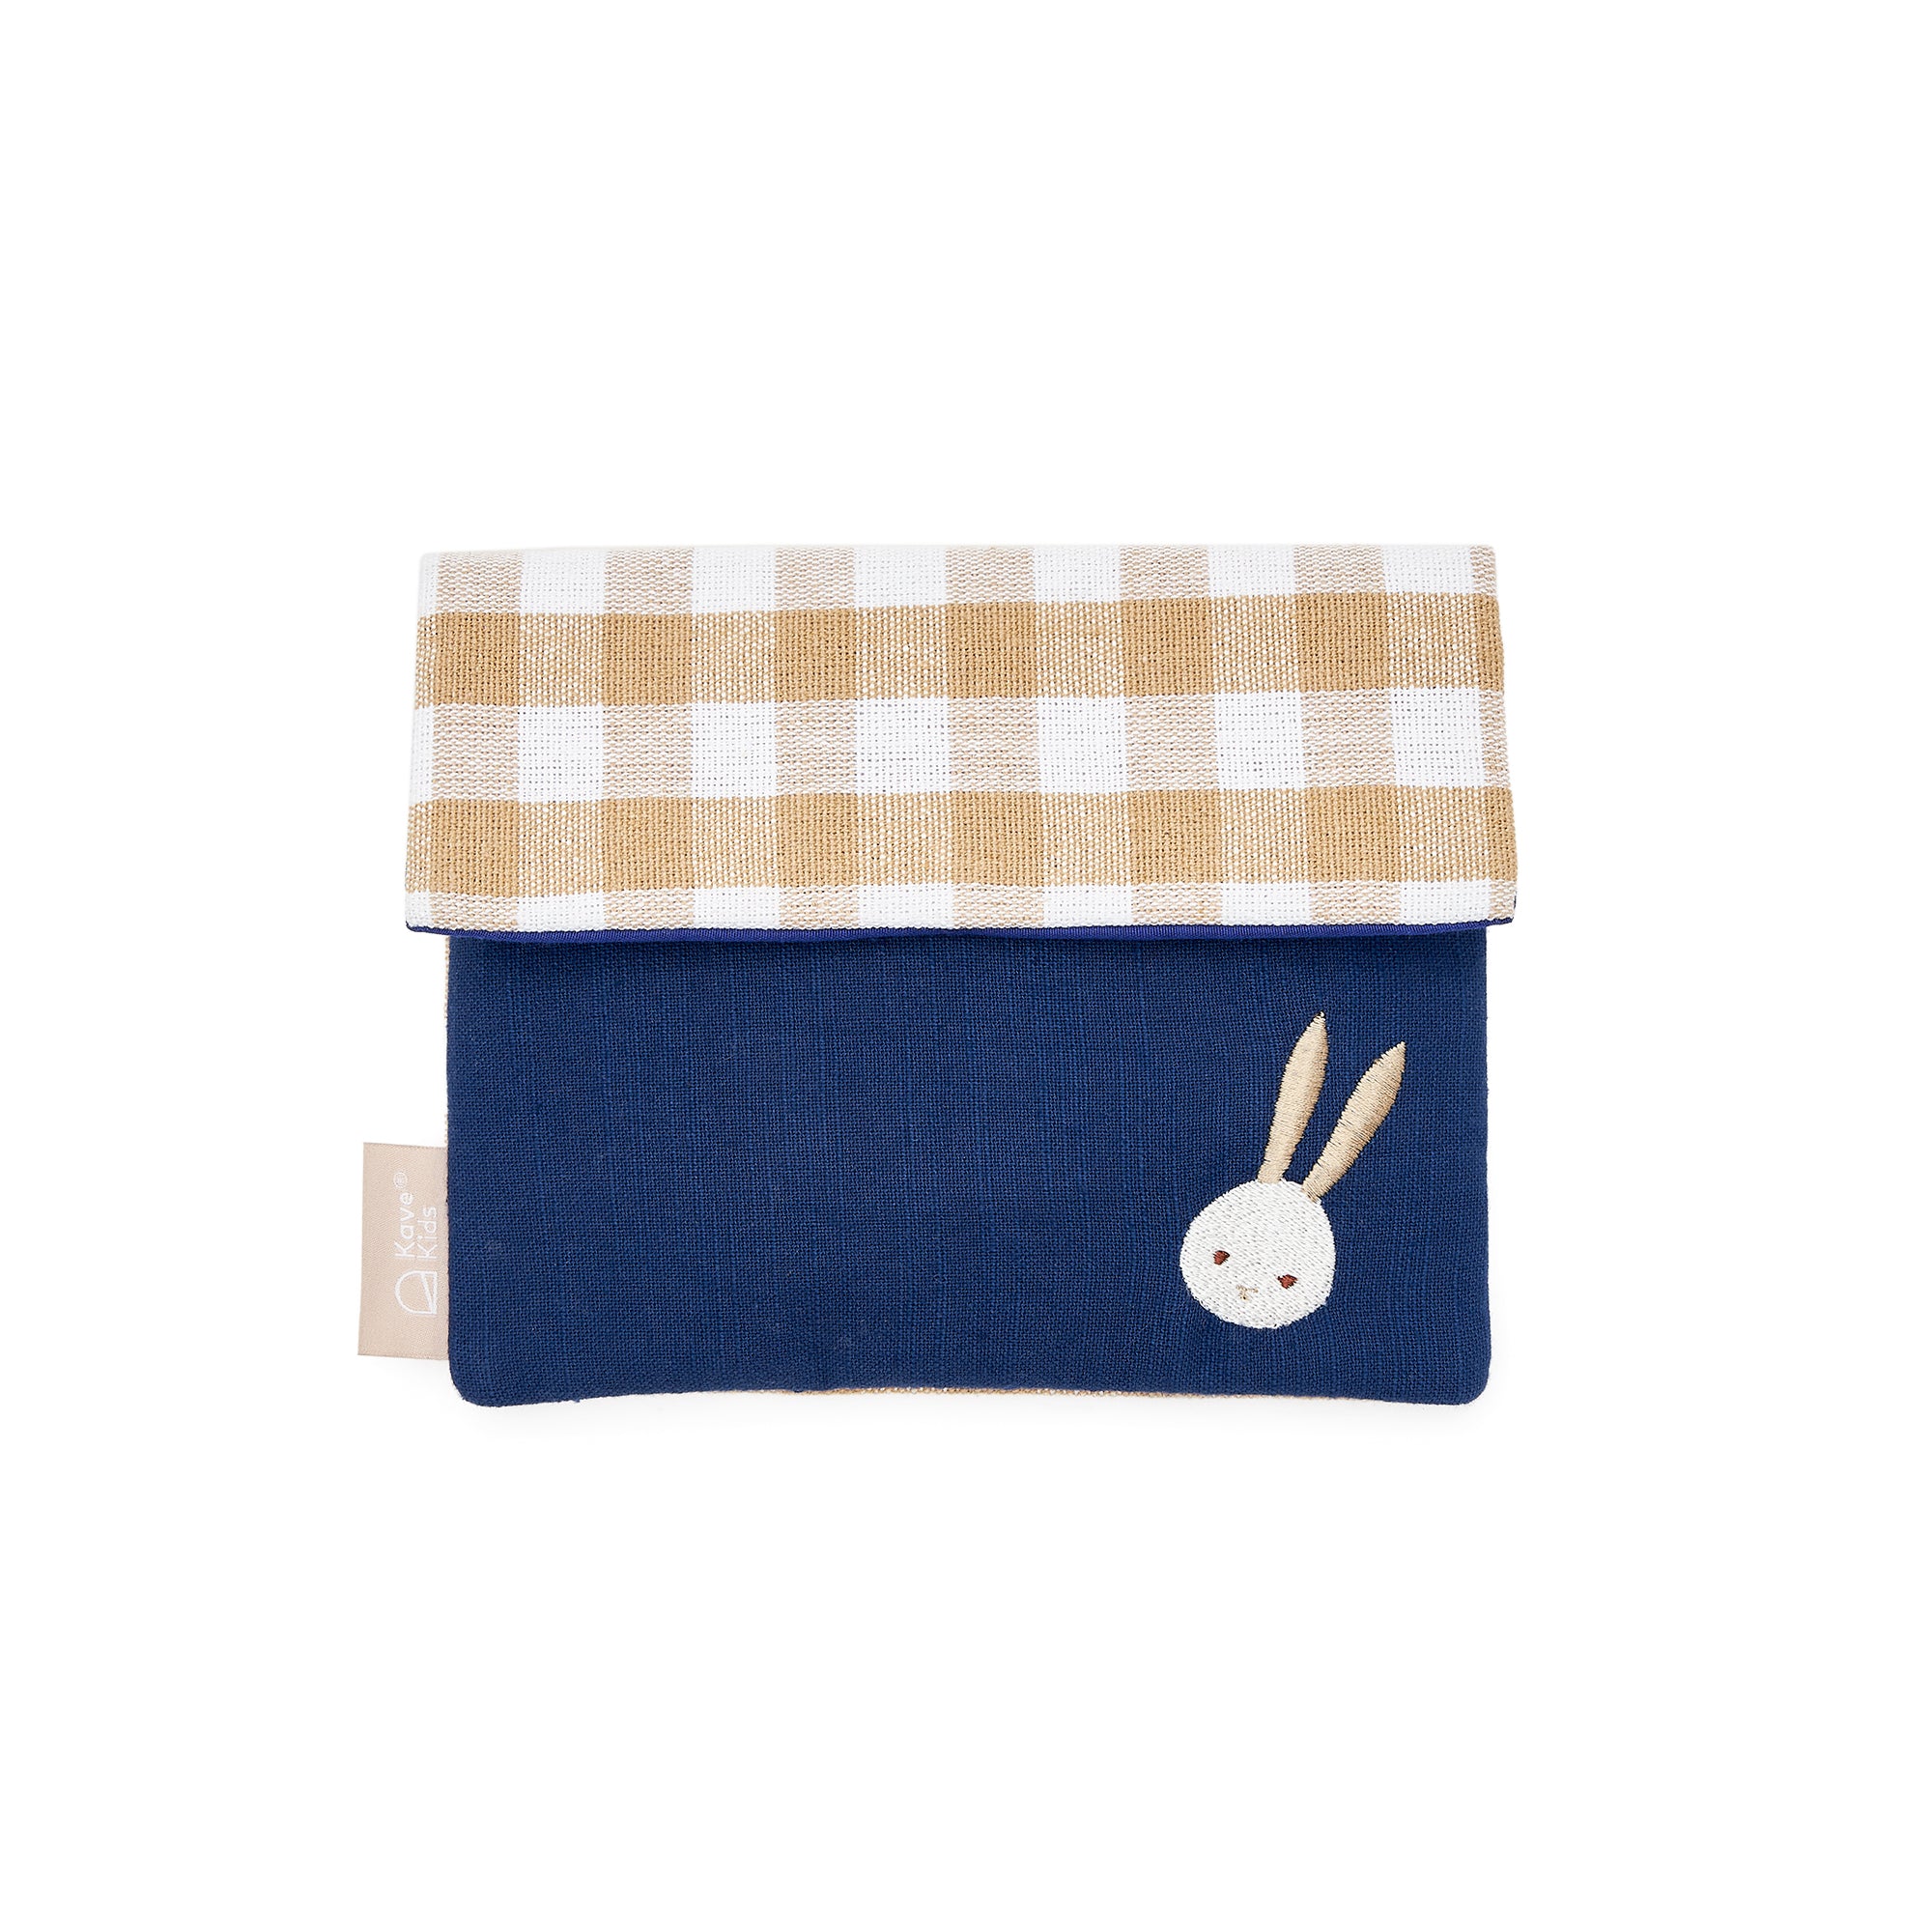 Yanil blue vichy check Yanil case with embroidered rabbit